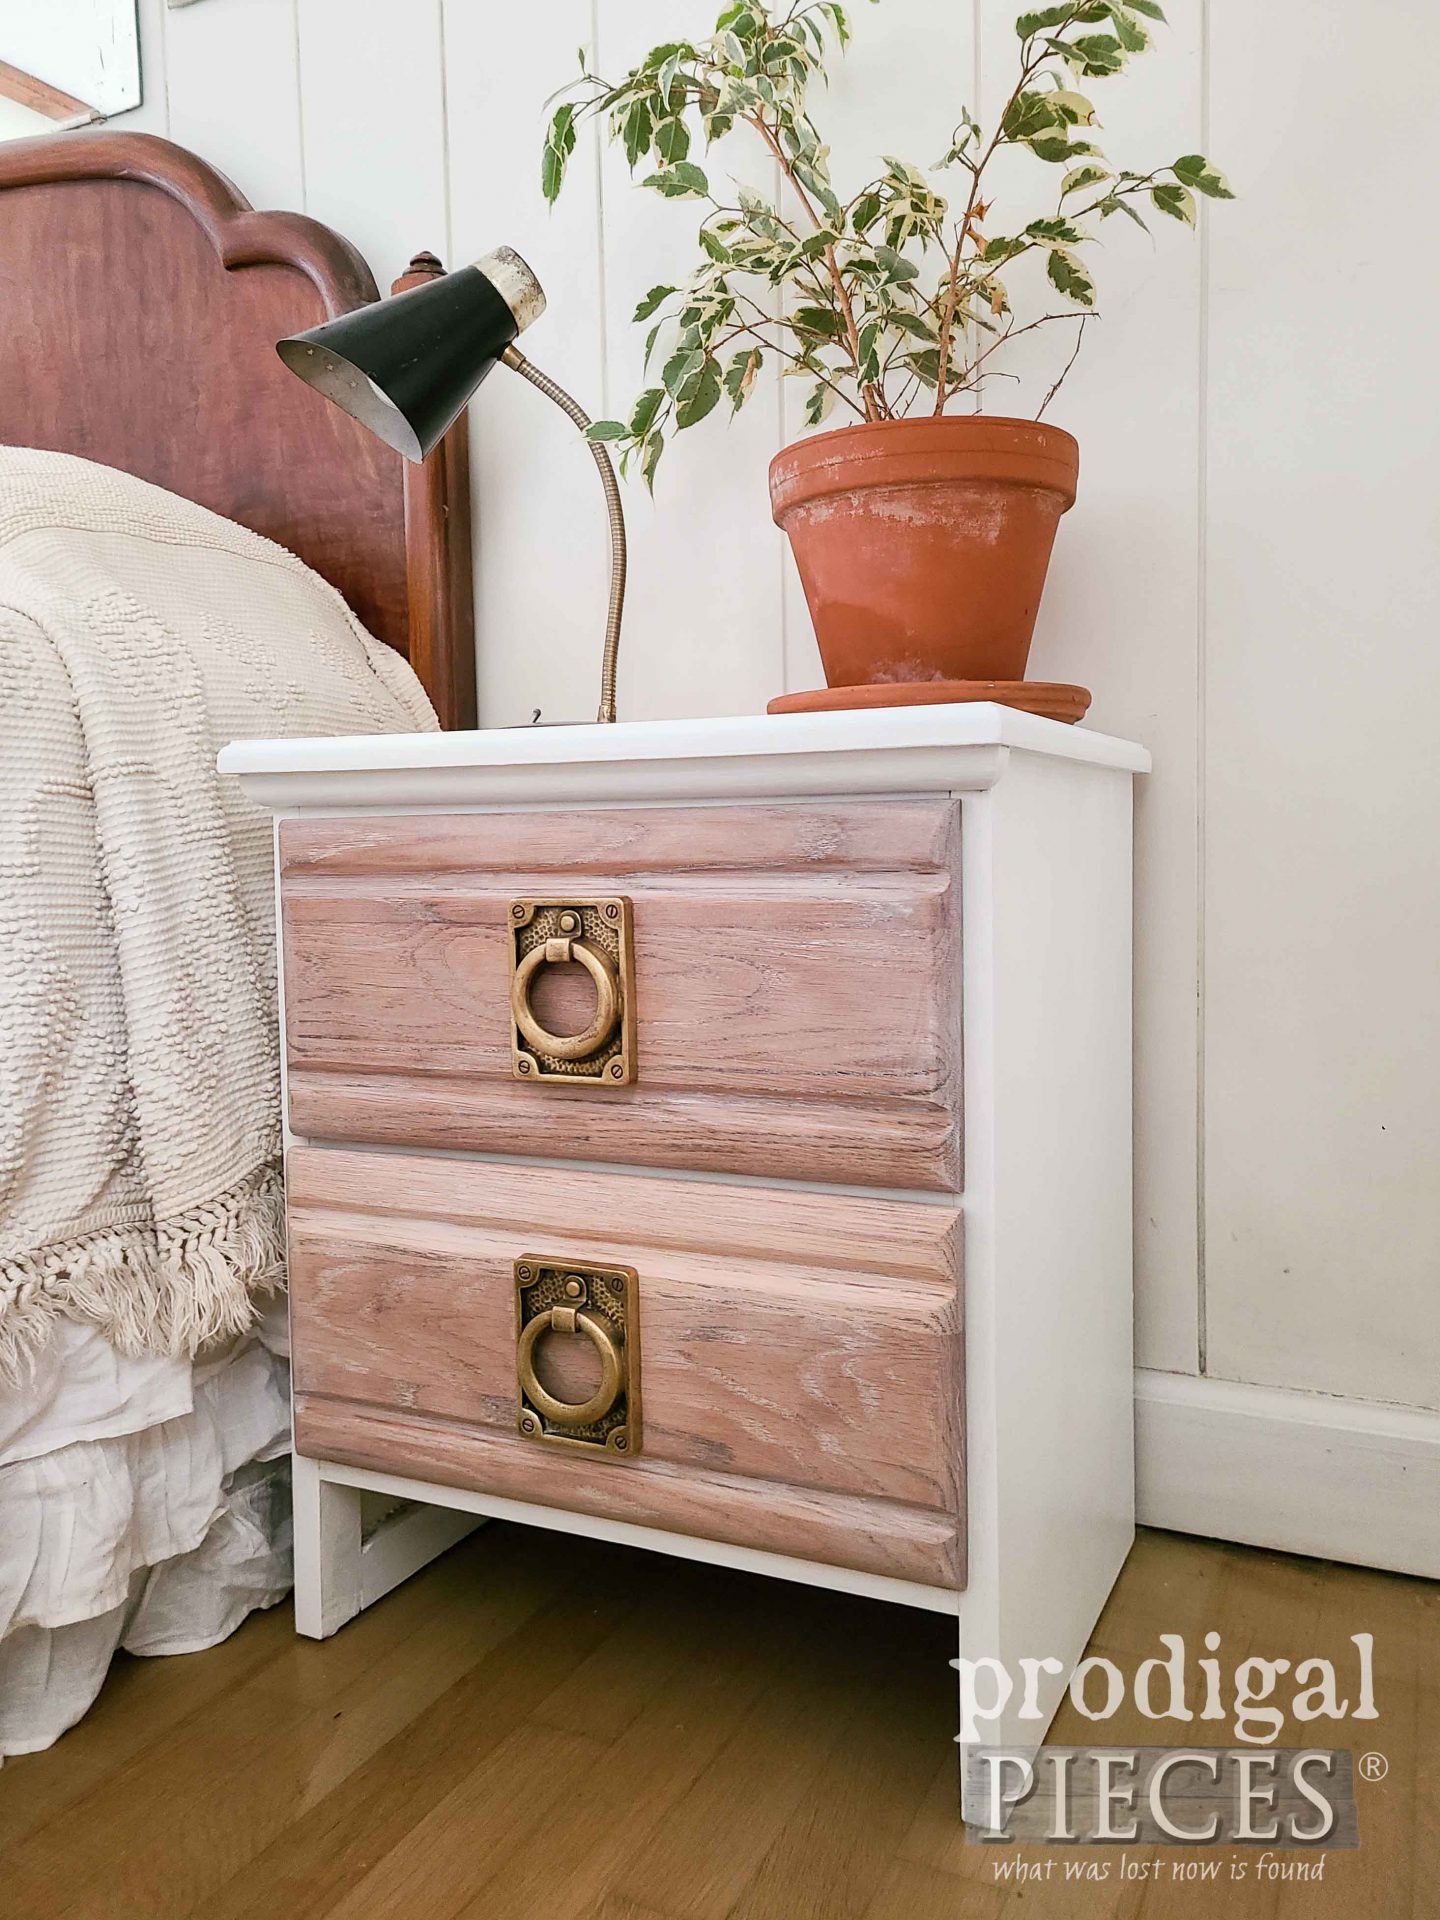 White Boho Vintage Nightstand from Dated to Modern Chic by Larissa of Prodigal Pieces | prodigalpieces.com #prodigalpieces #boho #modernfarmhouse #diy #furniture